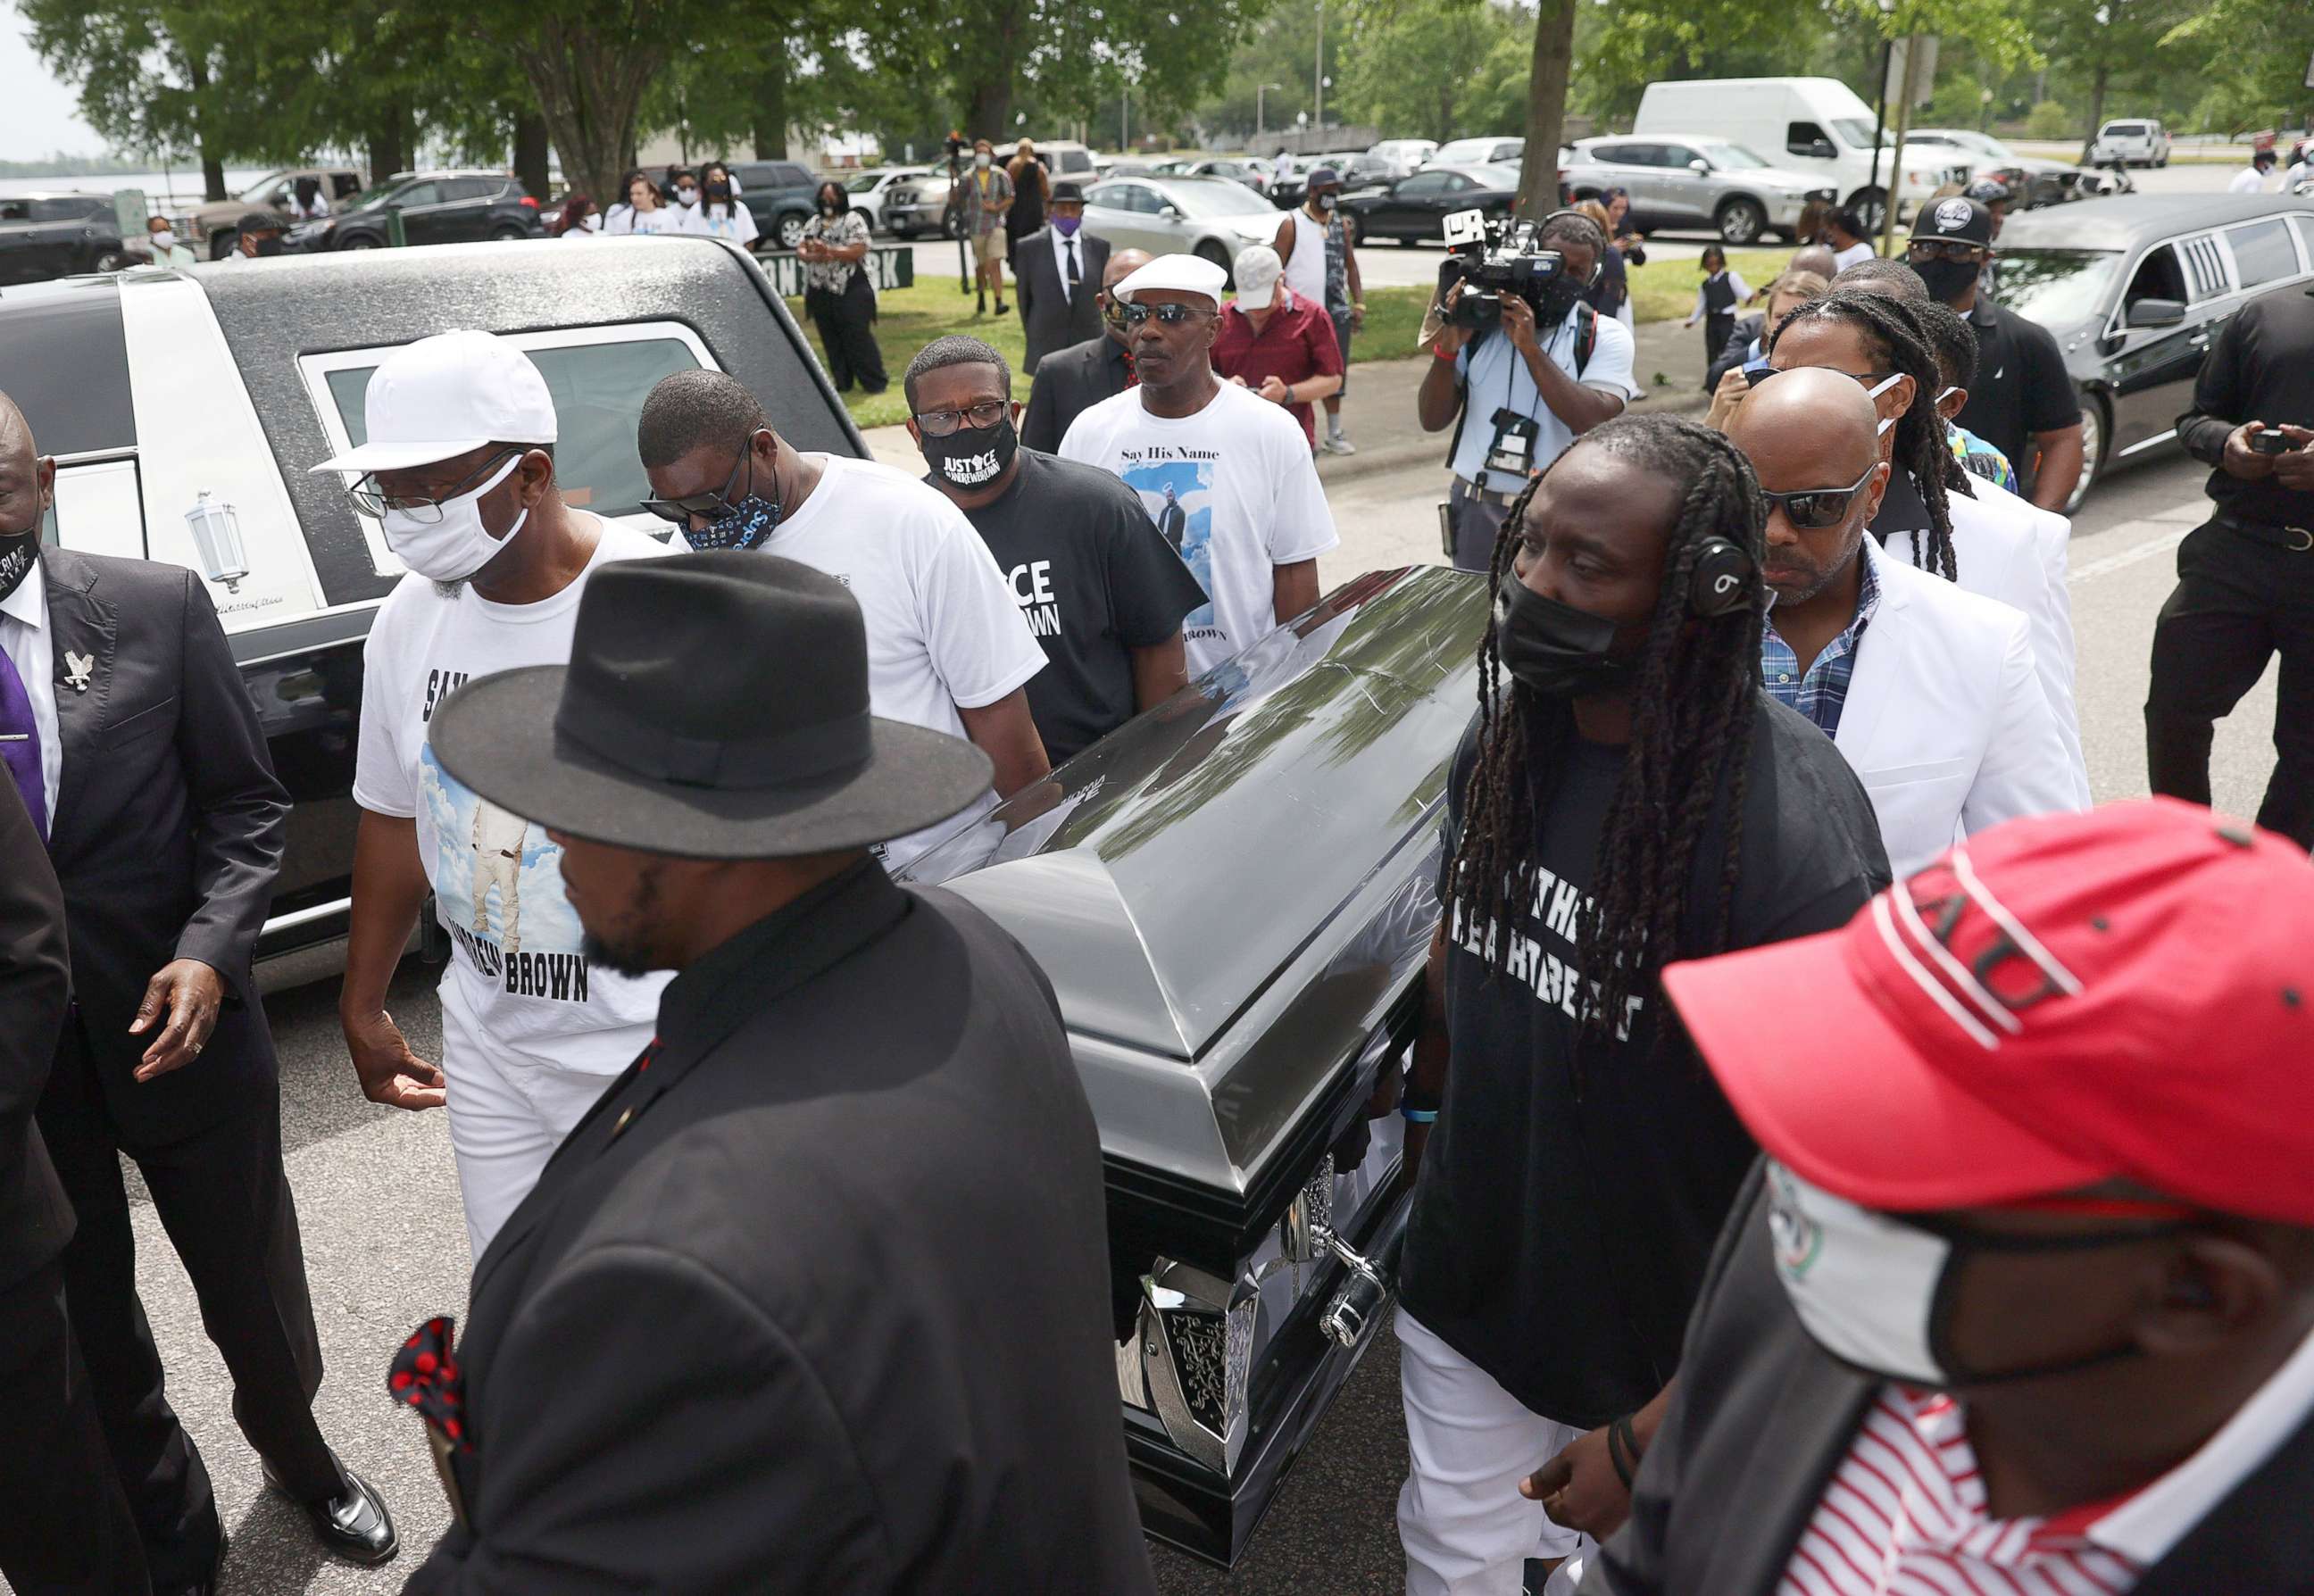 PHOTO: Pallbearers carry the casket of Andrew Brown Jr. to a horse drawn carriage before his funeral service at the Fountain of Life church on May 3, 2021 in Elizabeth City, N.C.